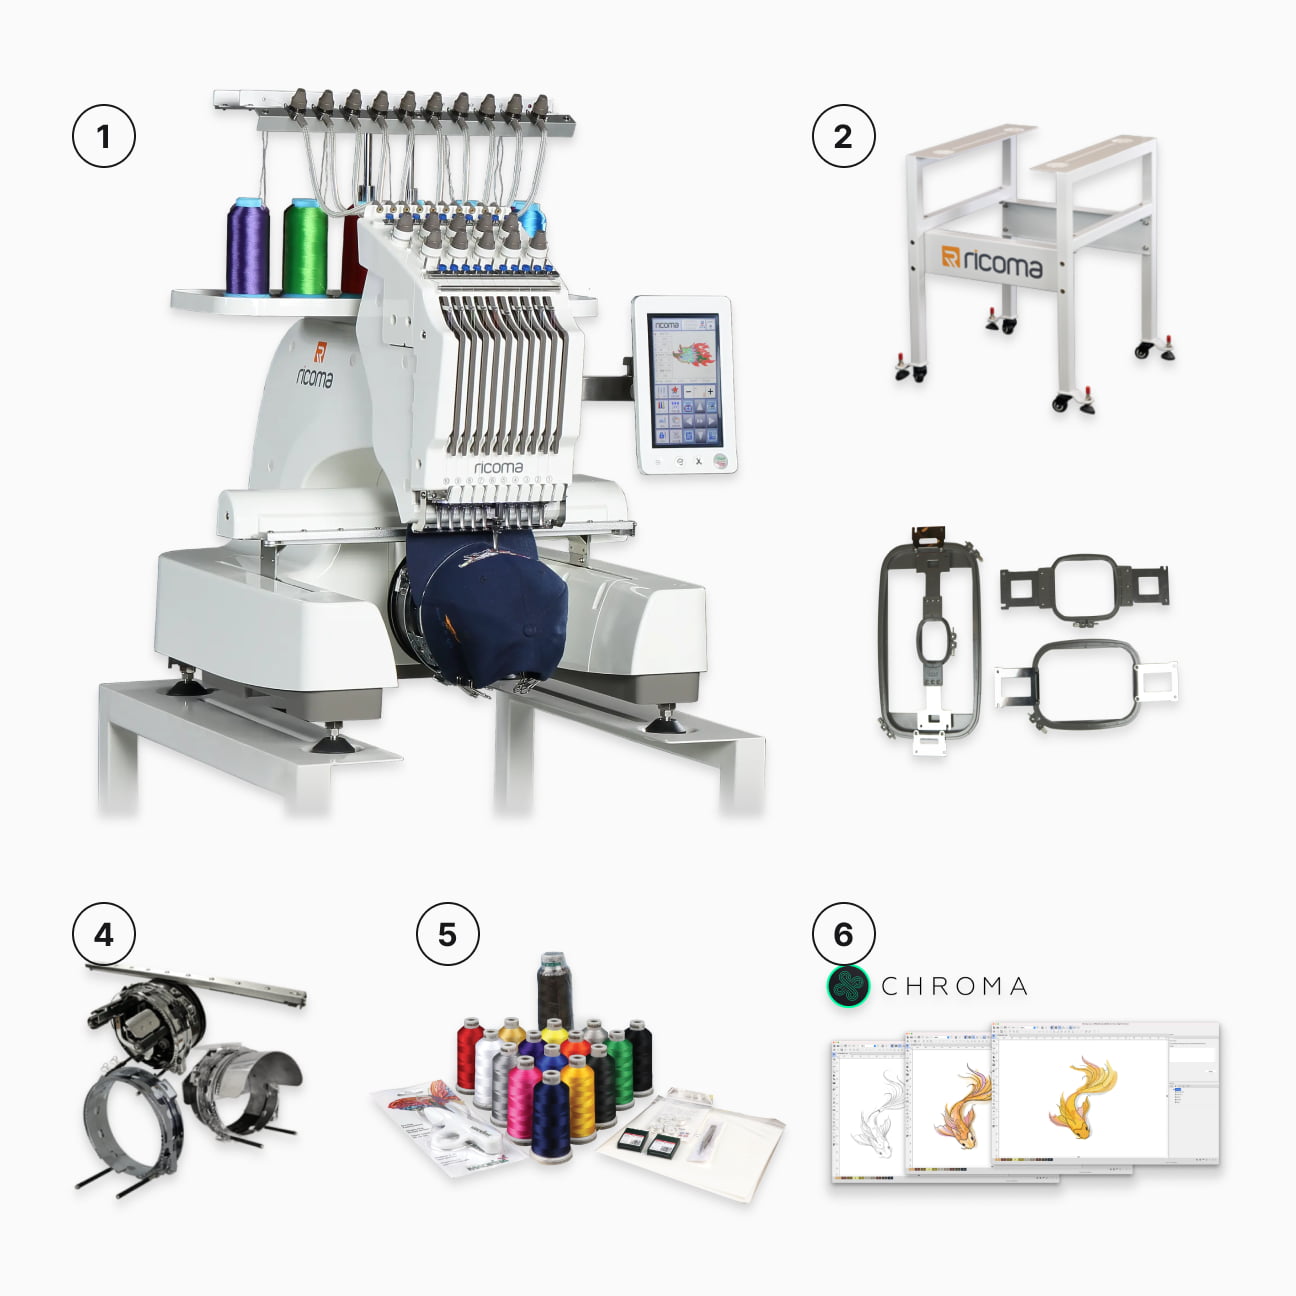 EM-1010 embroidery machine,Heavy-duty steel stand,Four flat hoops for all types of embroidery projects,Cap driver assembly with cap rings to embroider caps,Embroidery starter kit with threads, needles, backing and more,Chroma Inspire digitizing software